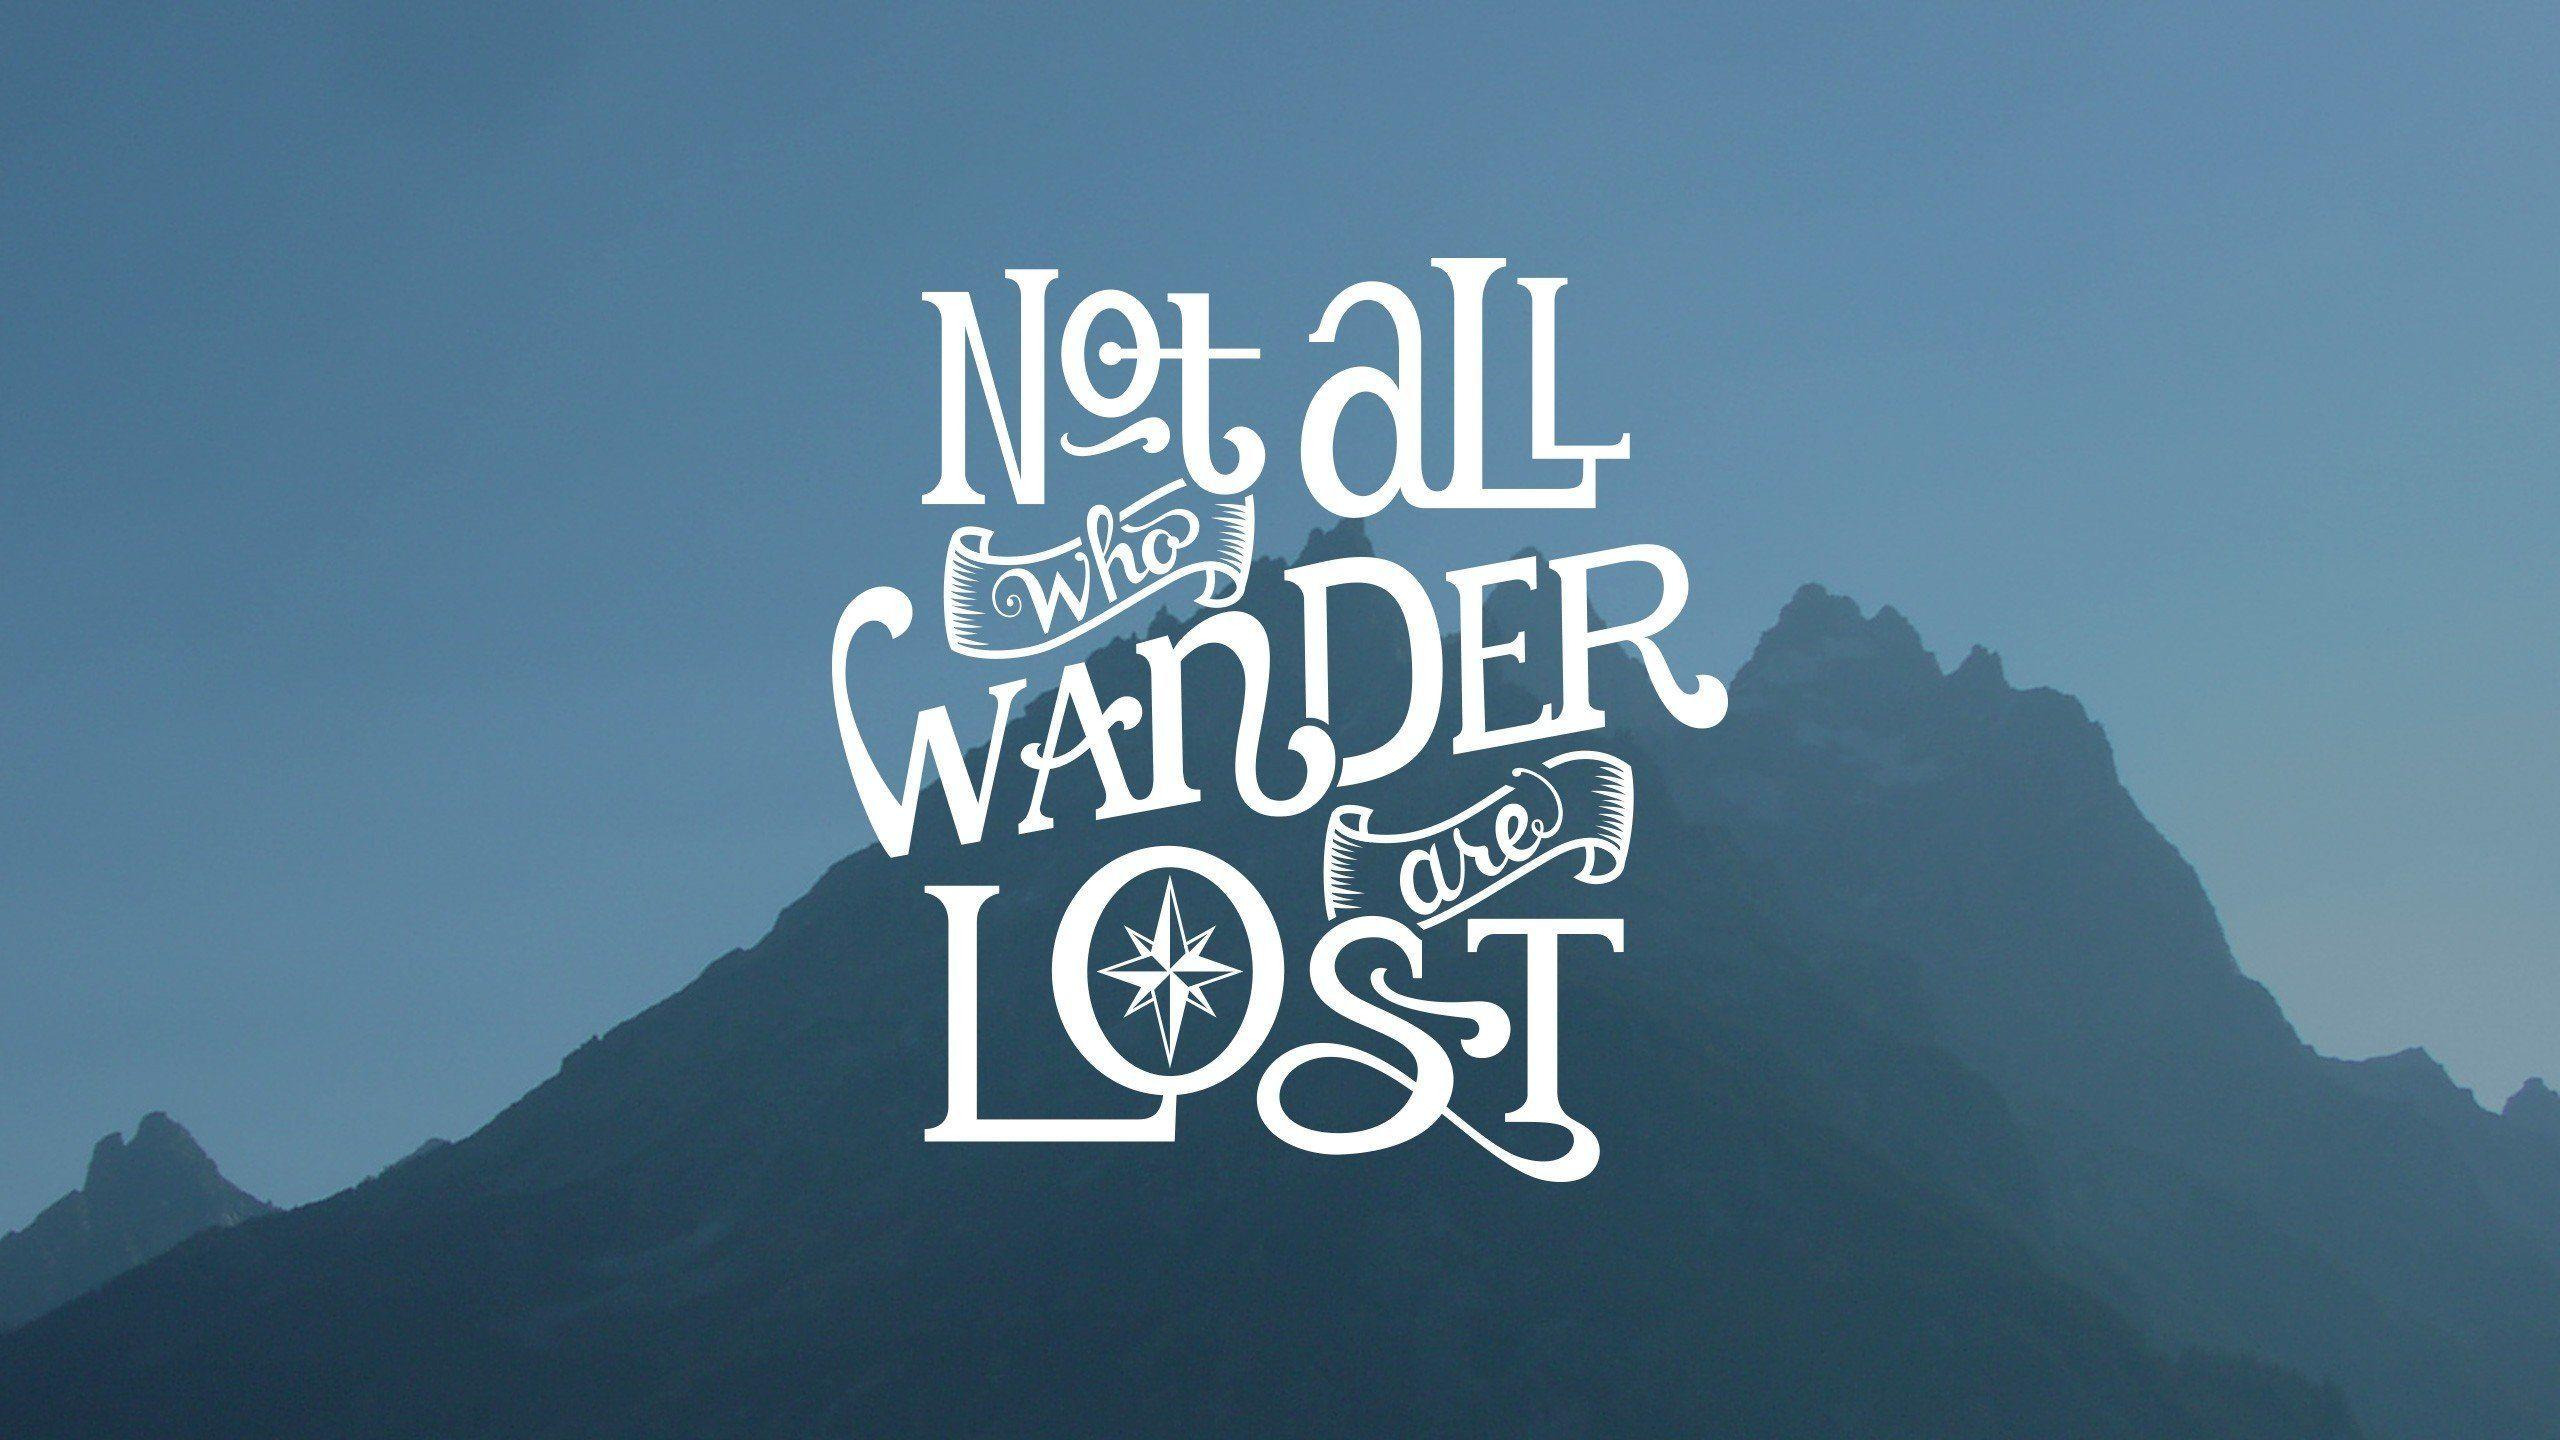 Free Lord Of The Rings Quotes Wallpaper For Android « Long